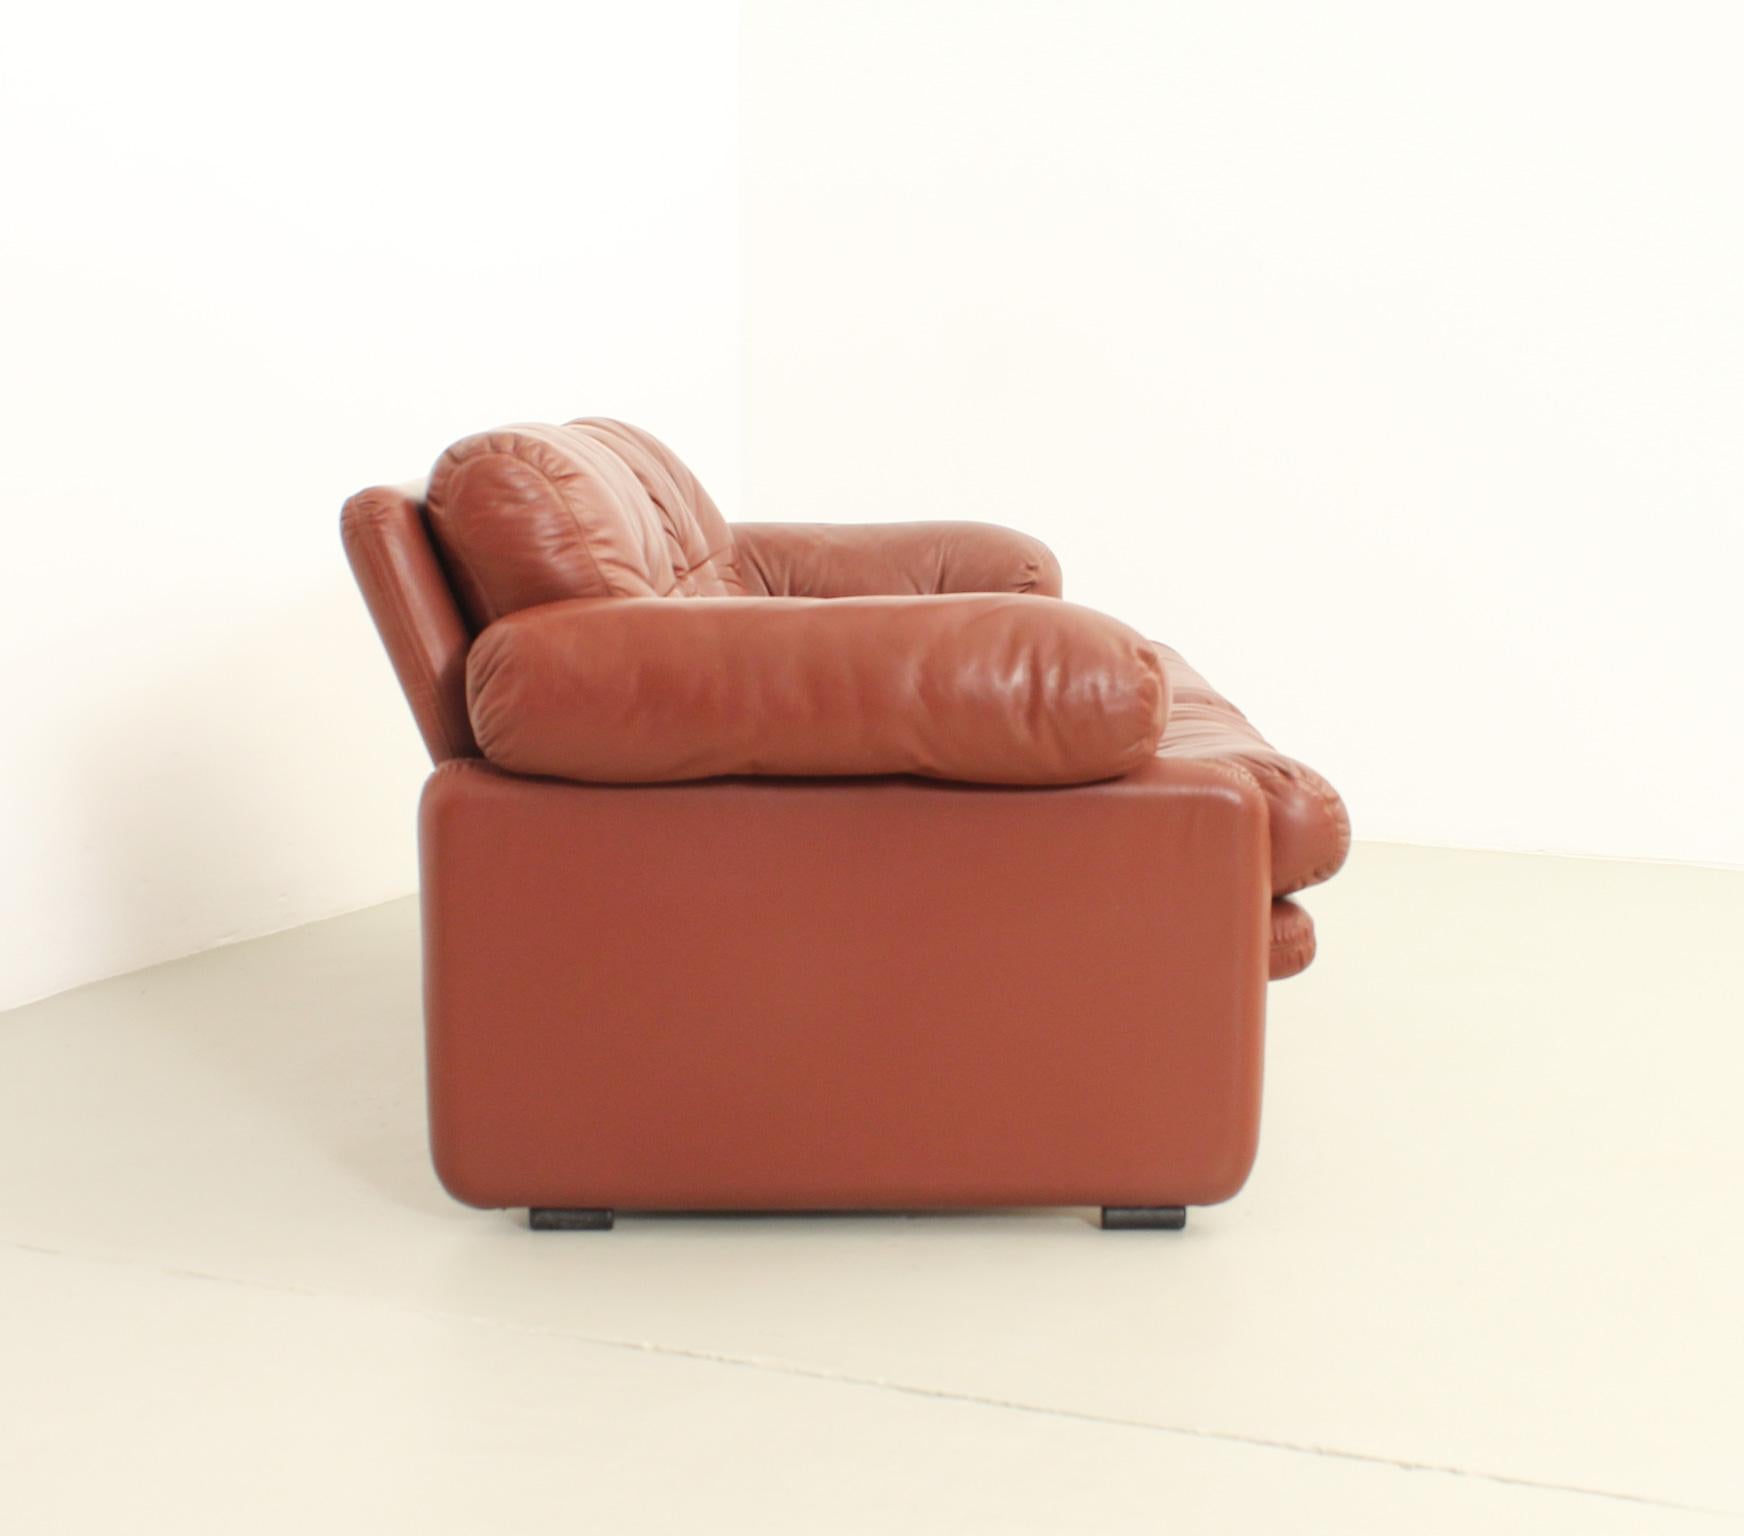 Coronado Two-seater Sofa by Tobia Scarpa in Cognac Leather, 1969 For Sale 2